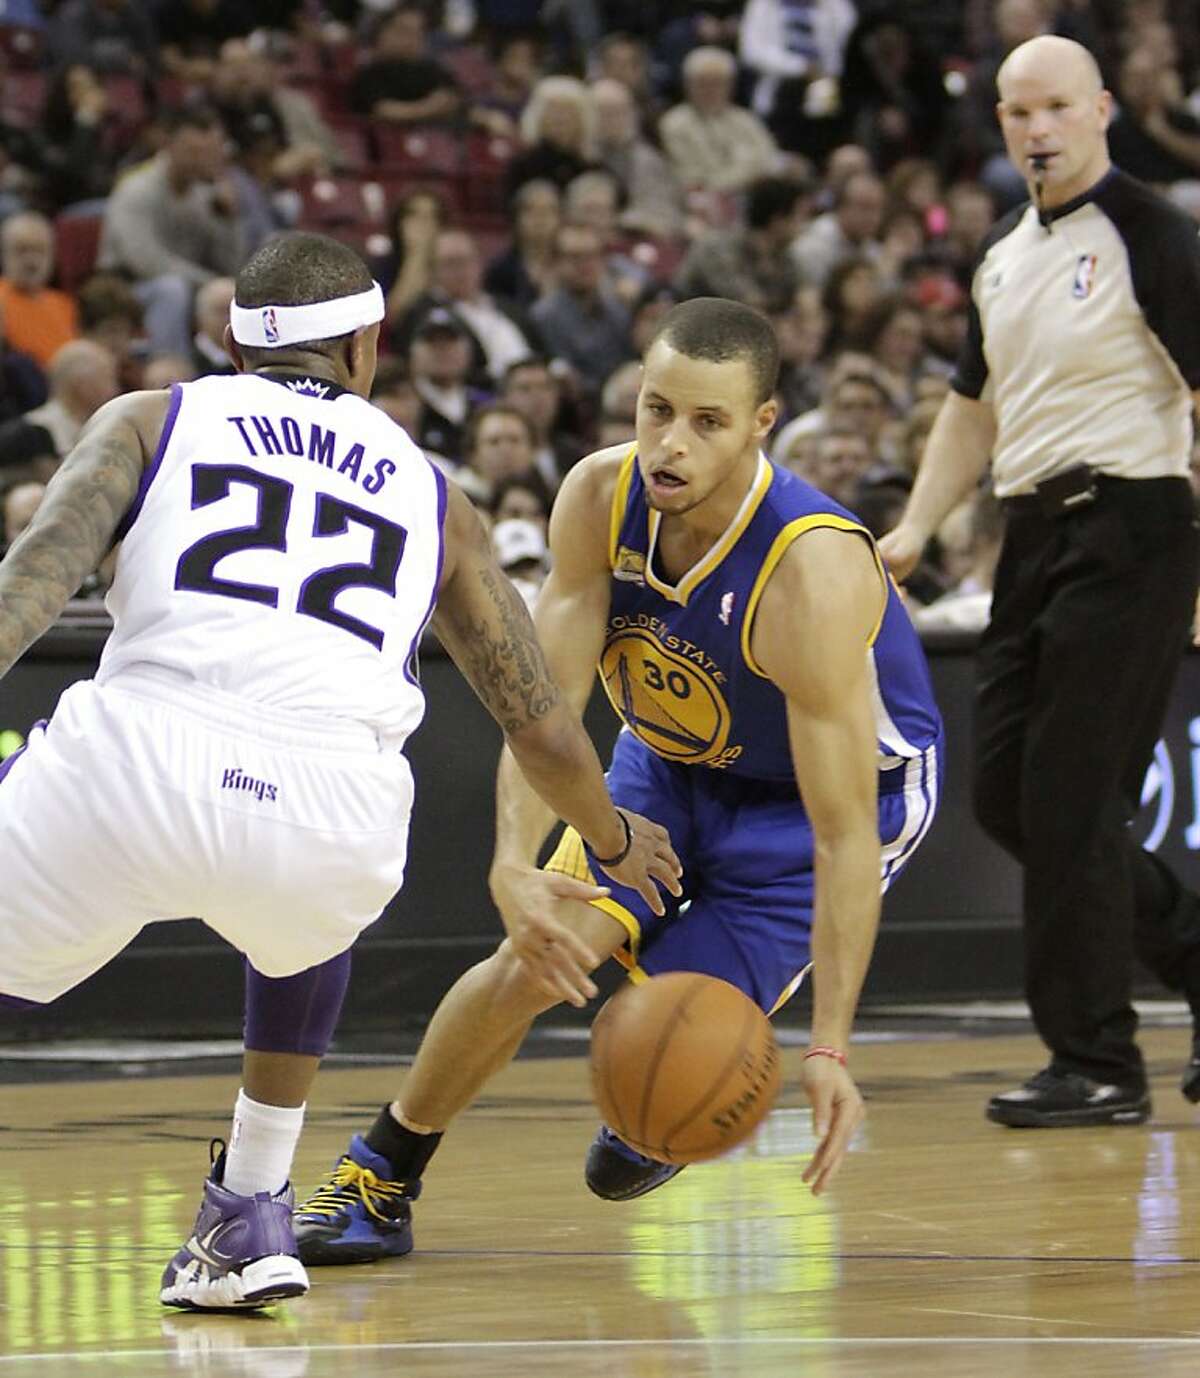 Golden State Warriors guard Stephen Curry, right, eludes Sacramento Kings guard Isaiah Thomas during the second quarter of an NBA basketball game in Sacramento, Calif., Saturday, Feb. 4, 2012. (AP Photo/Rich Pedroncelli)